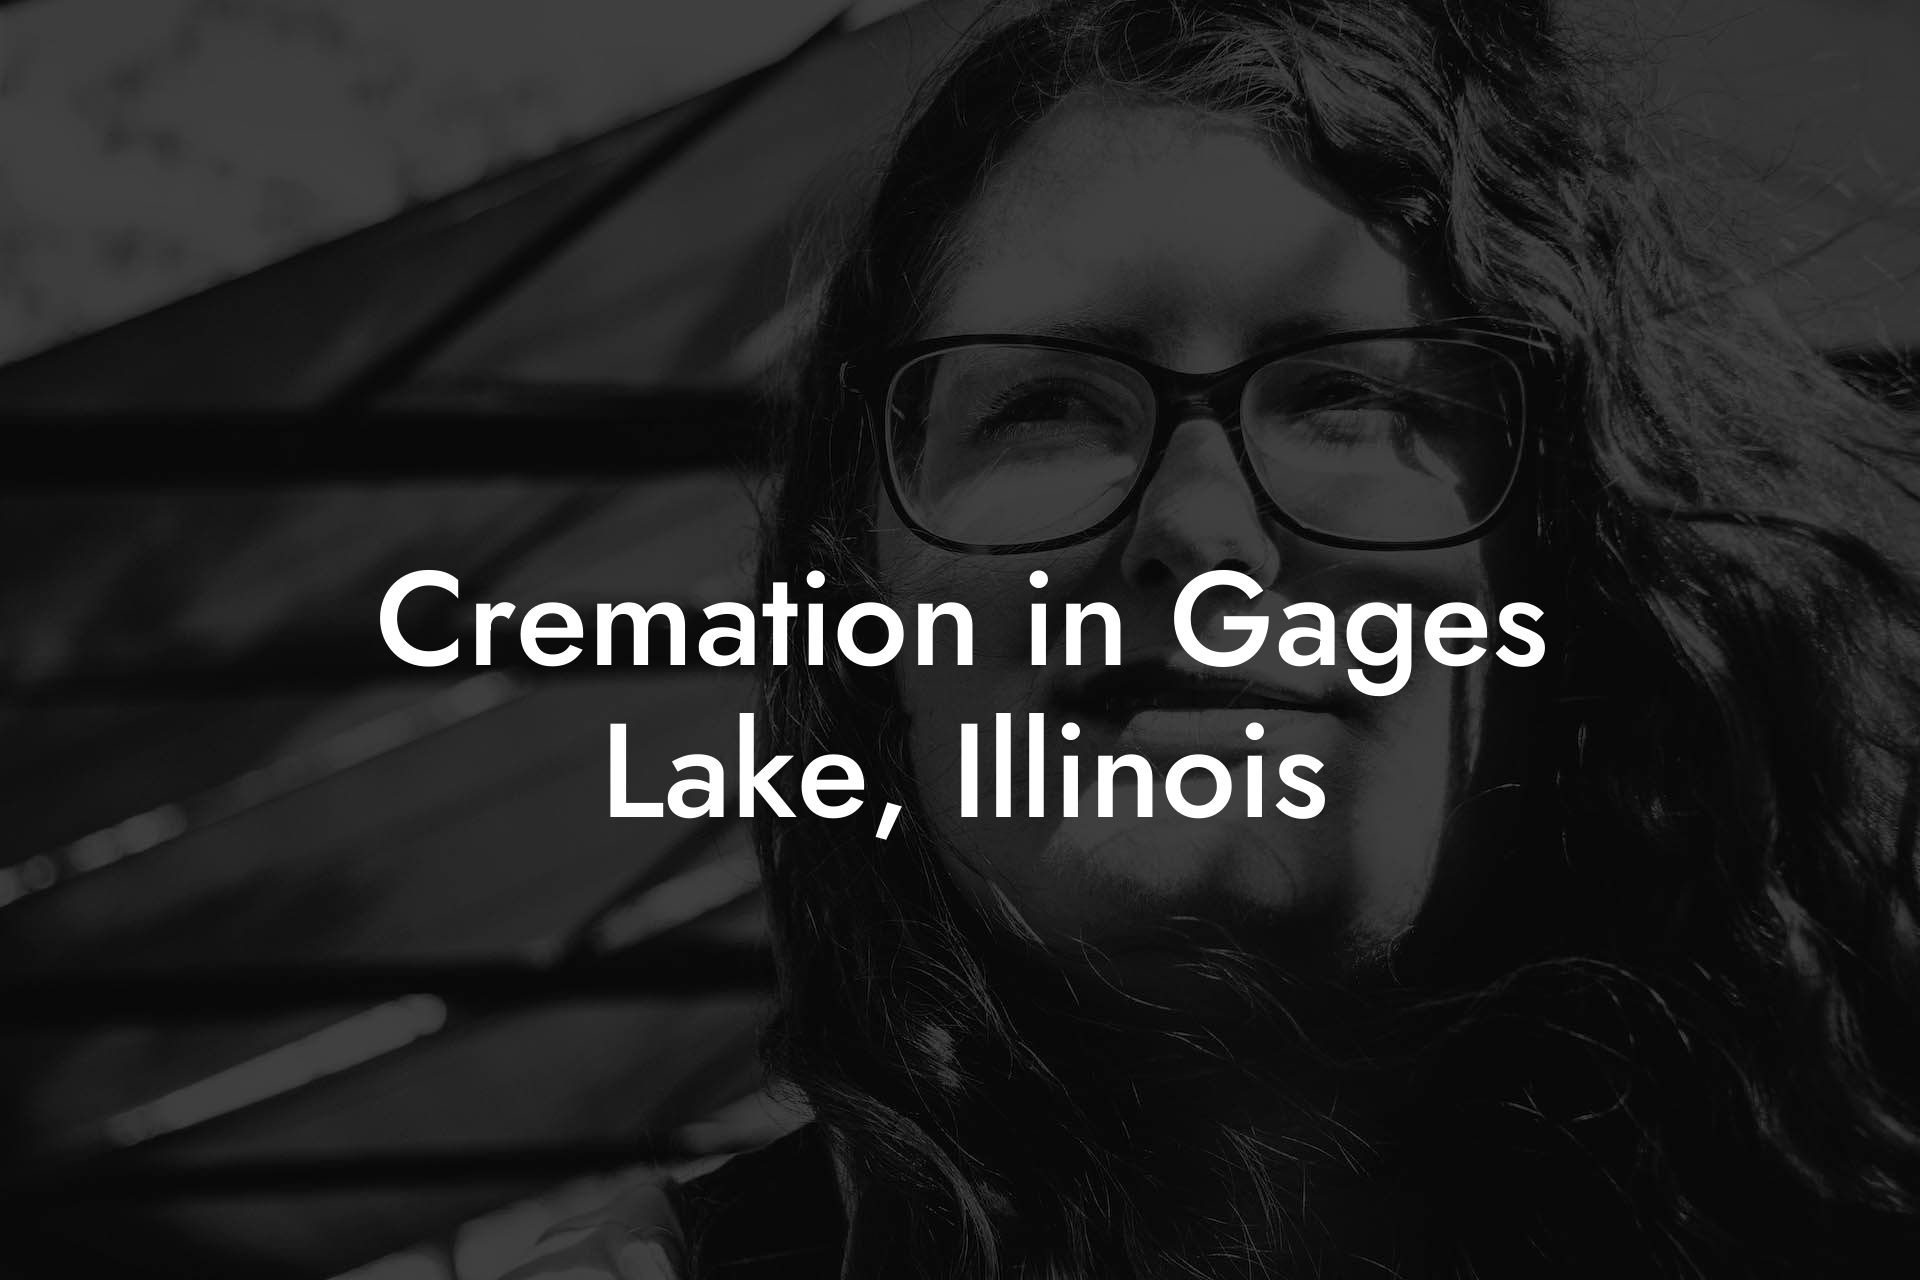 Cremation in Gages Lake, Illinois